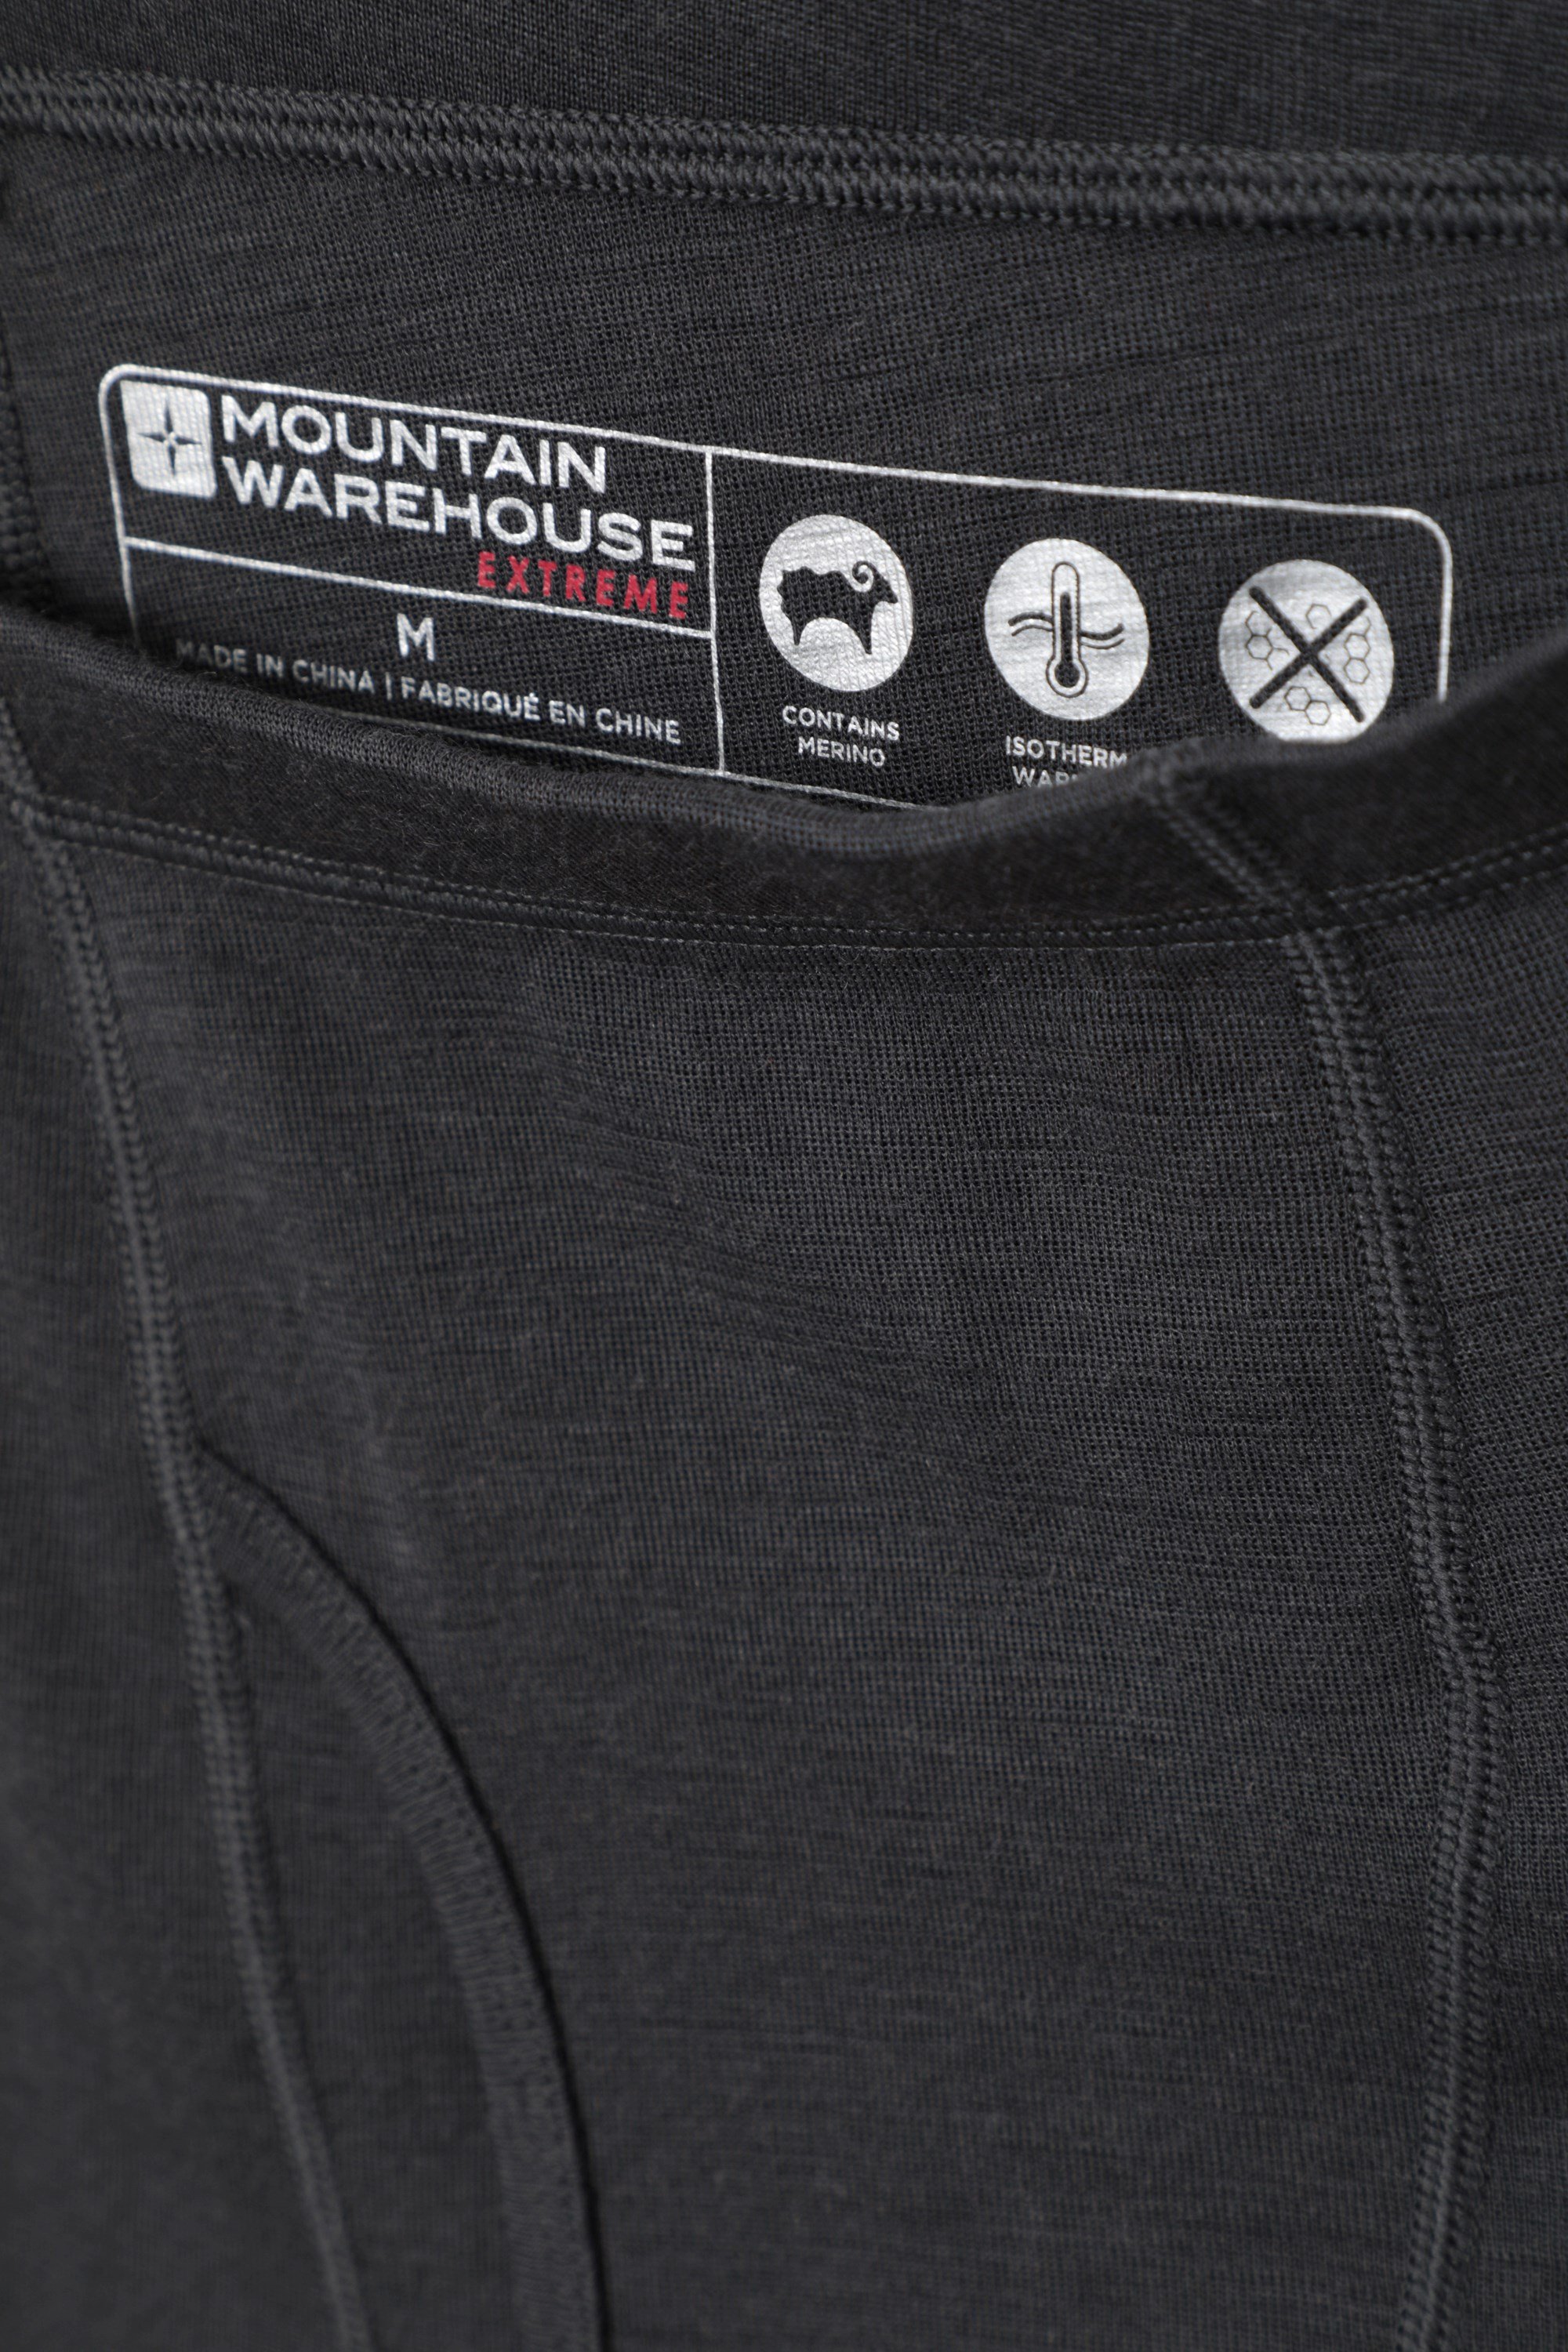 Merino Thermals : Mountain Warehouse Canada Footwear, Have a look at our  selection of mountain warehouse trousers.